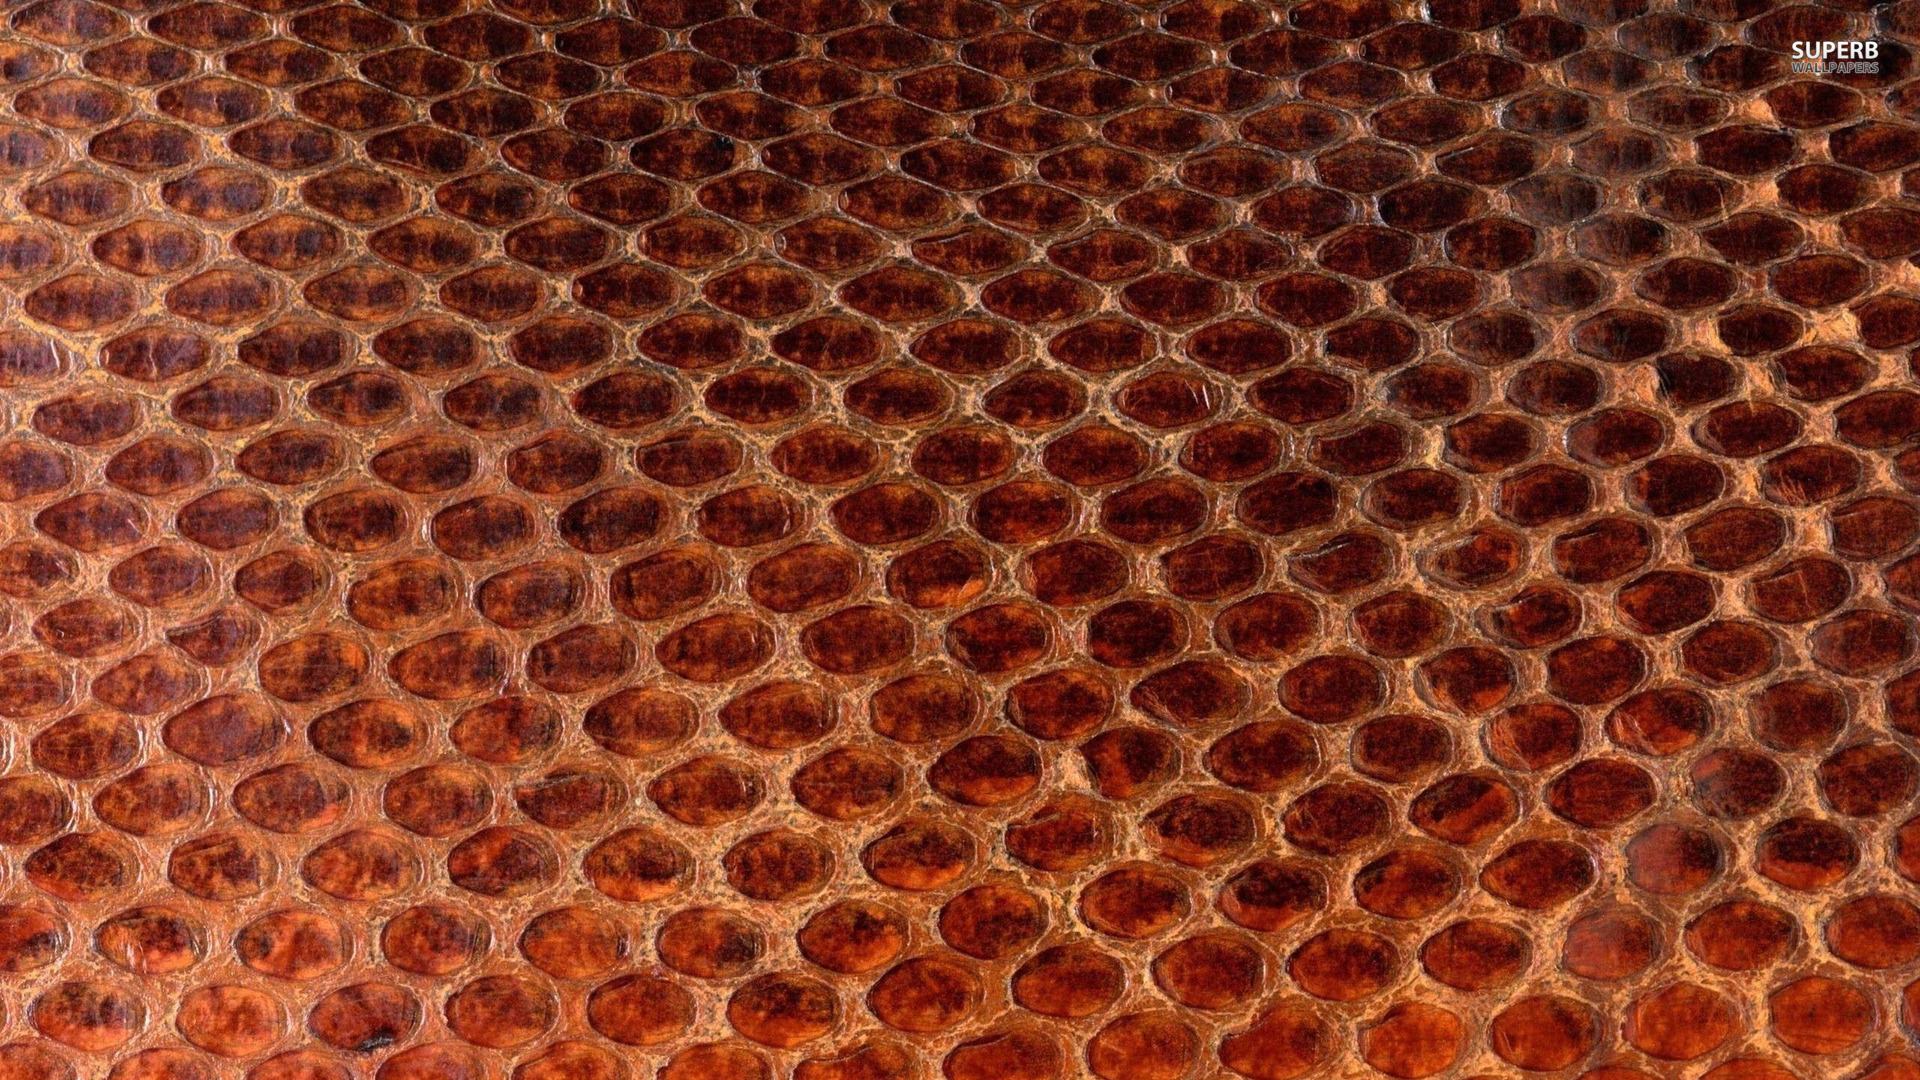 Honeycomb wallpaper - Photography wallpapers - #25281